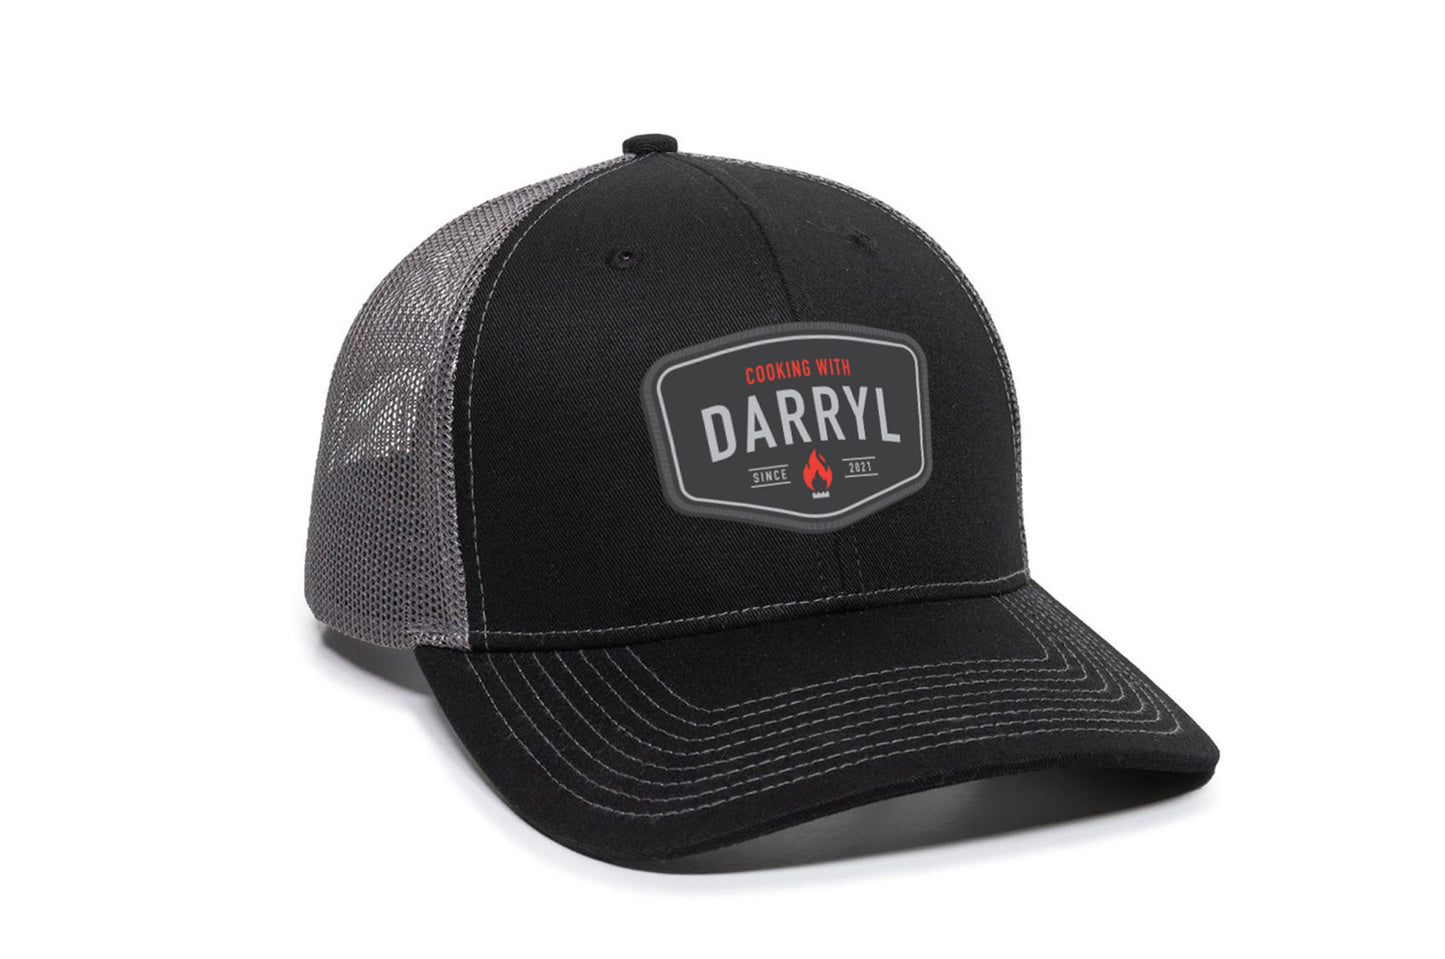 Cooking With Darryl Snapback Trucker Hat - Black/Charcoal